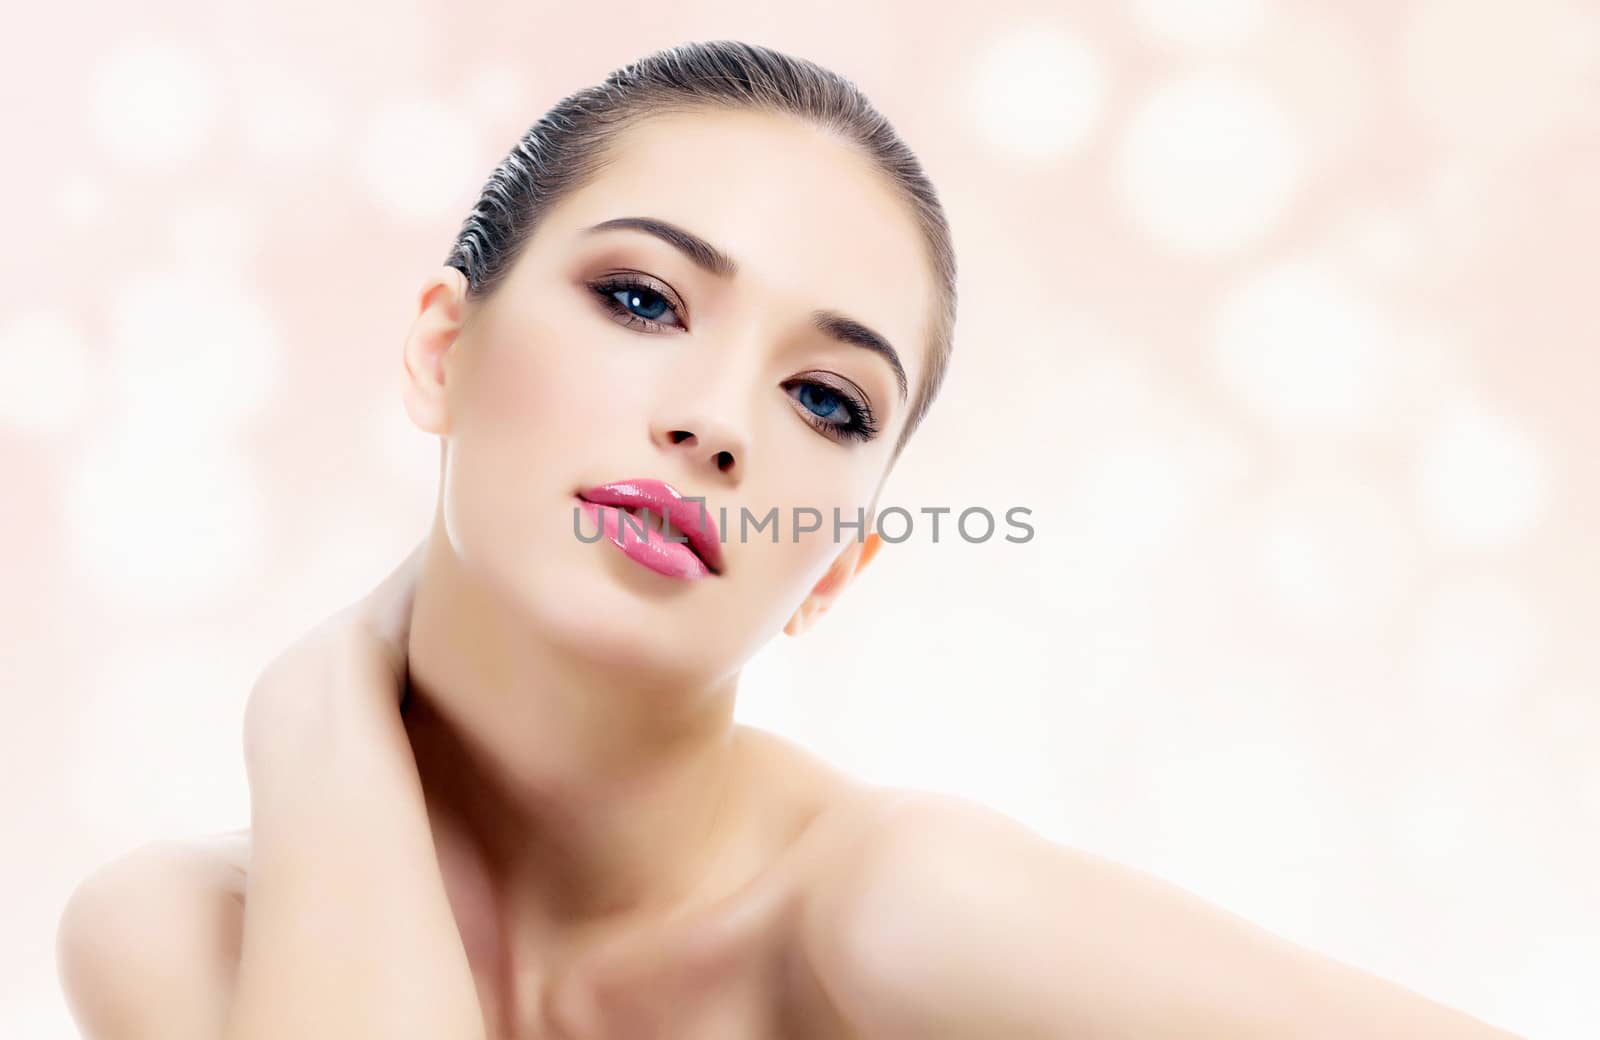 Pretty woman against an abstract background with circles and copyspace